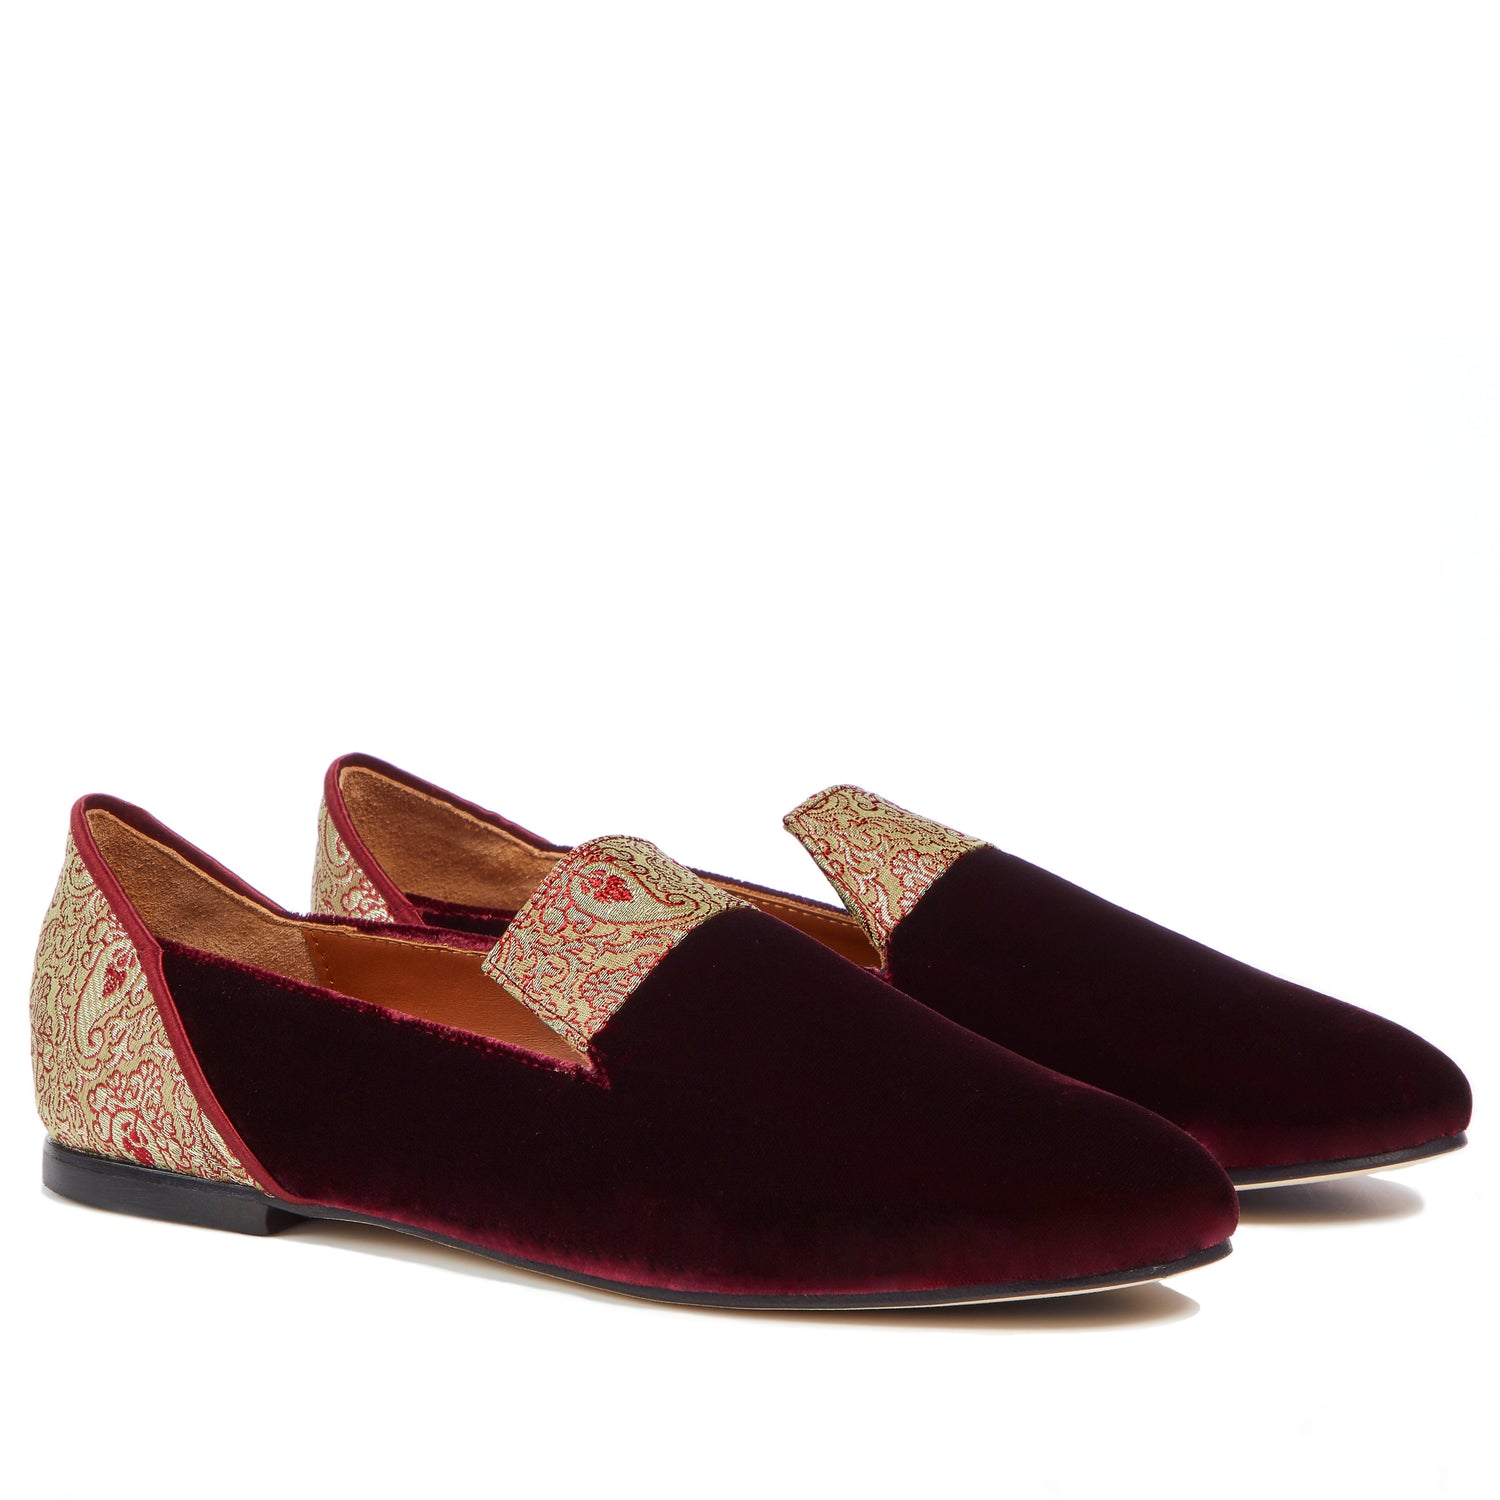 Loafers for Women, Red Essence of Shiraz Velvet Loafers - Boté A Mano